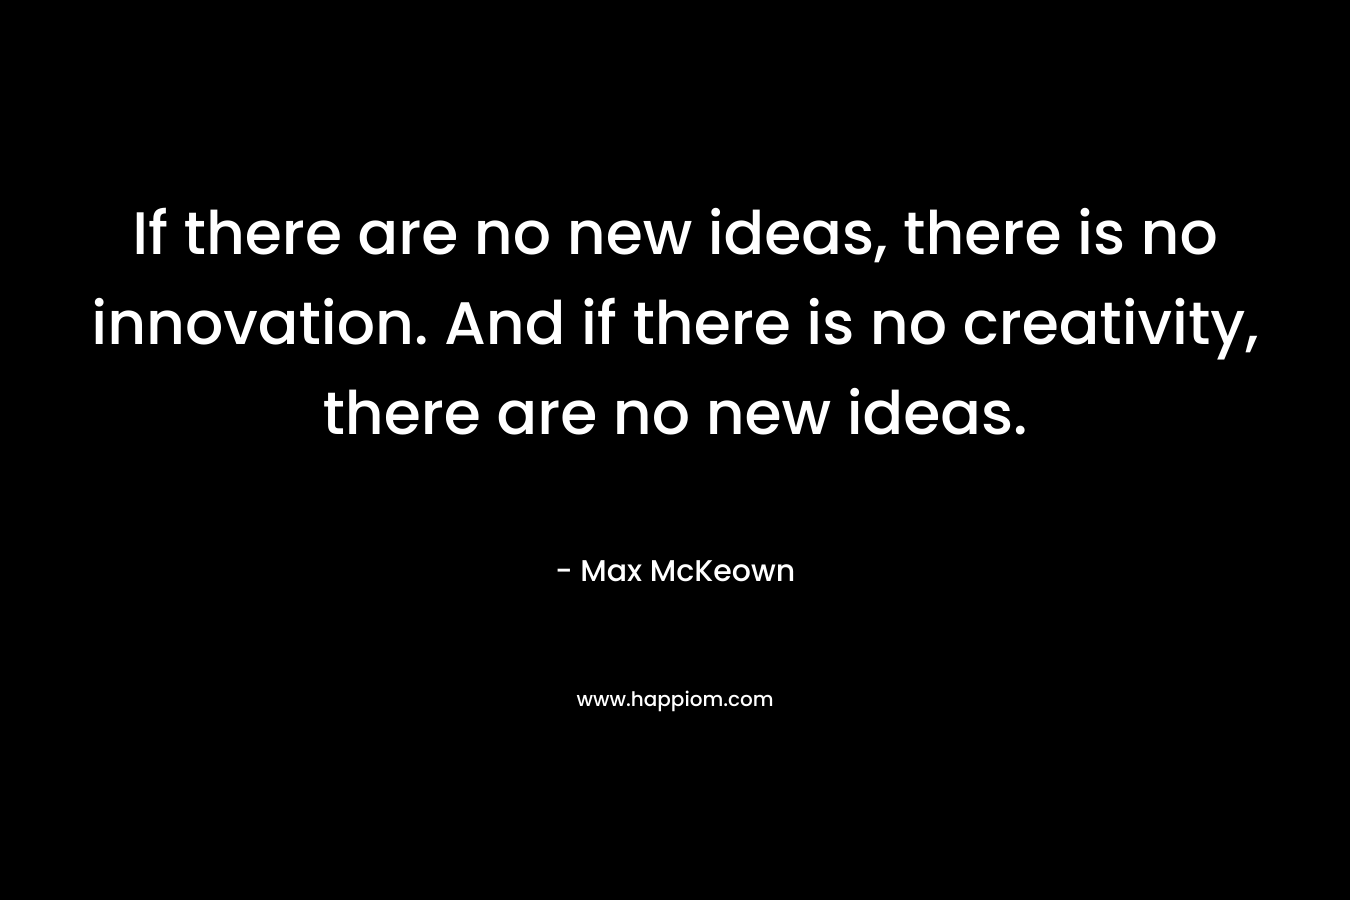 If there are no new ideas, there is no innovation. And if there is no creativity, there are no new ideas.